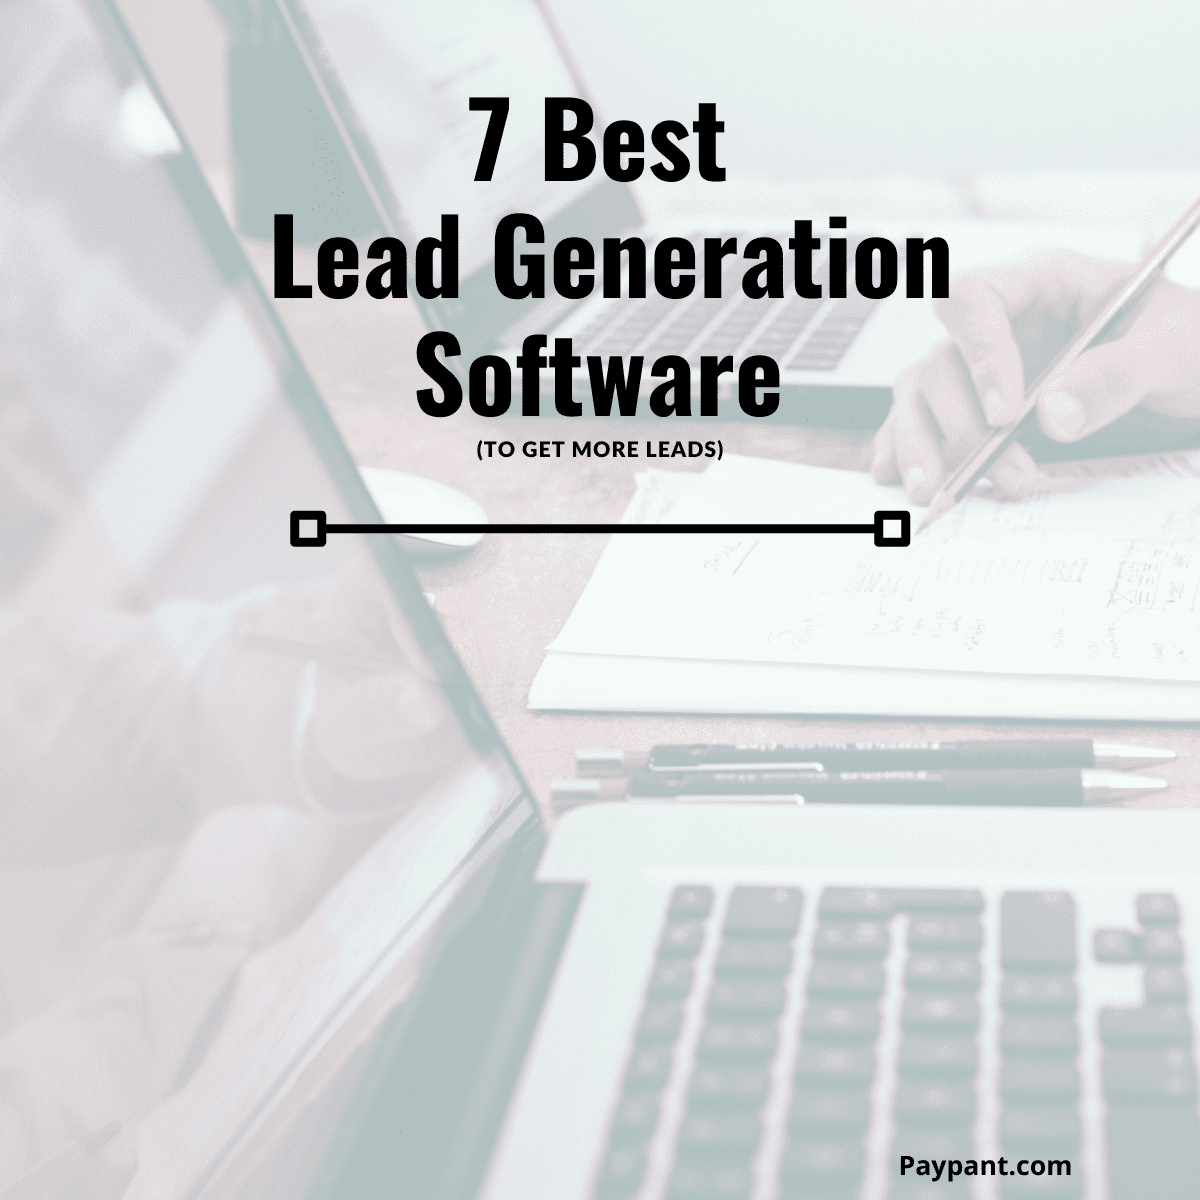 7 Best Lead Generation Software (to Get More Leads)